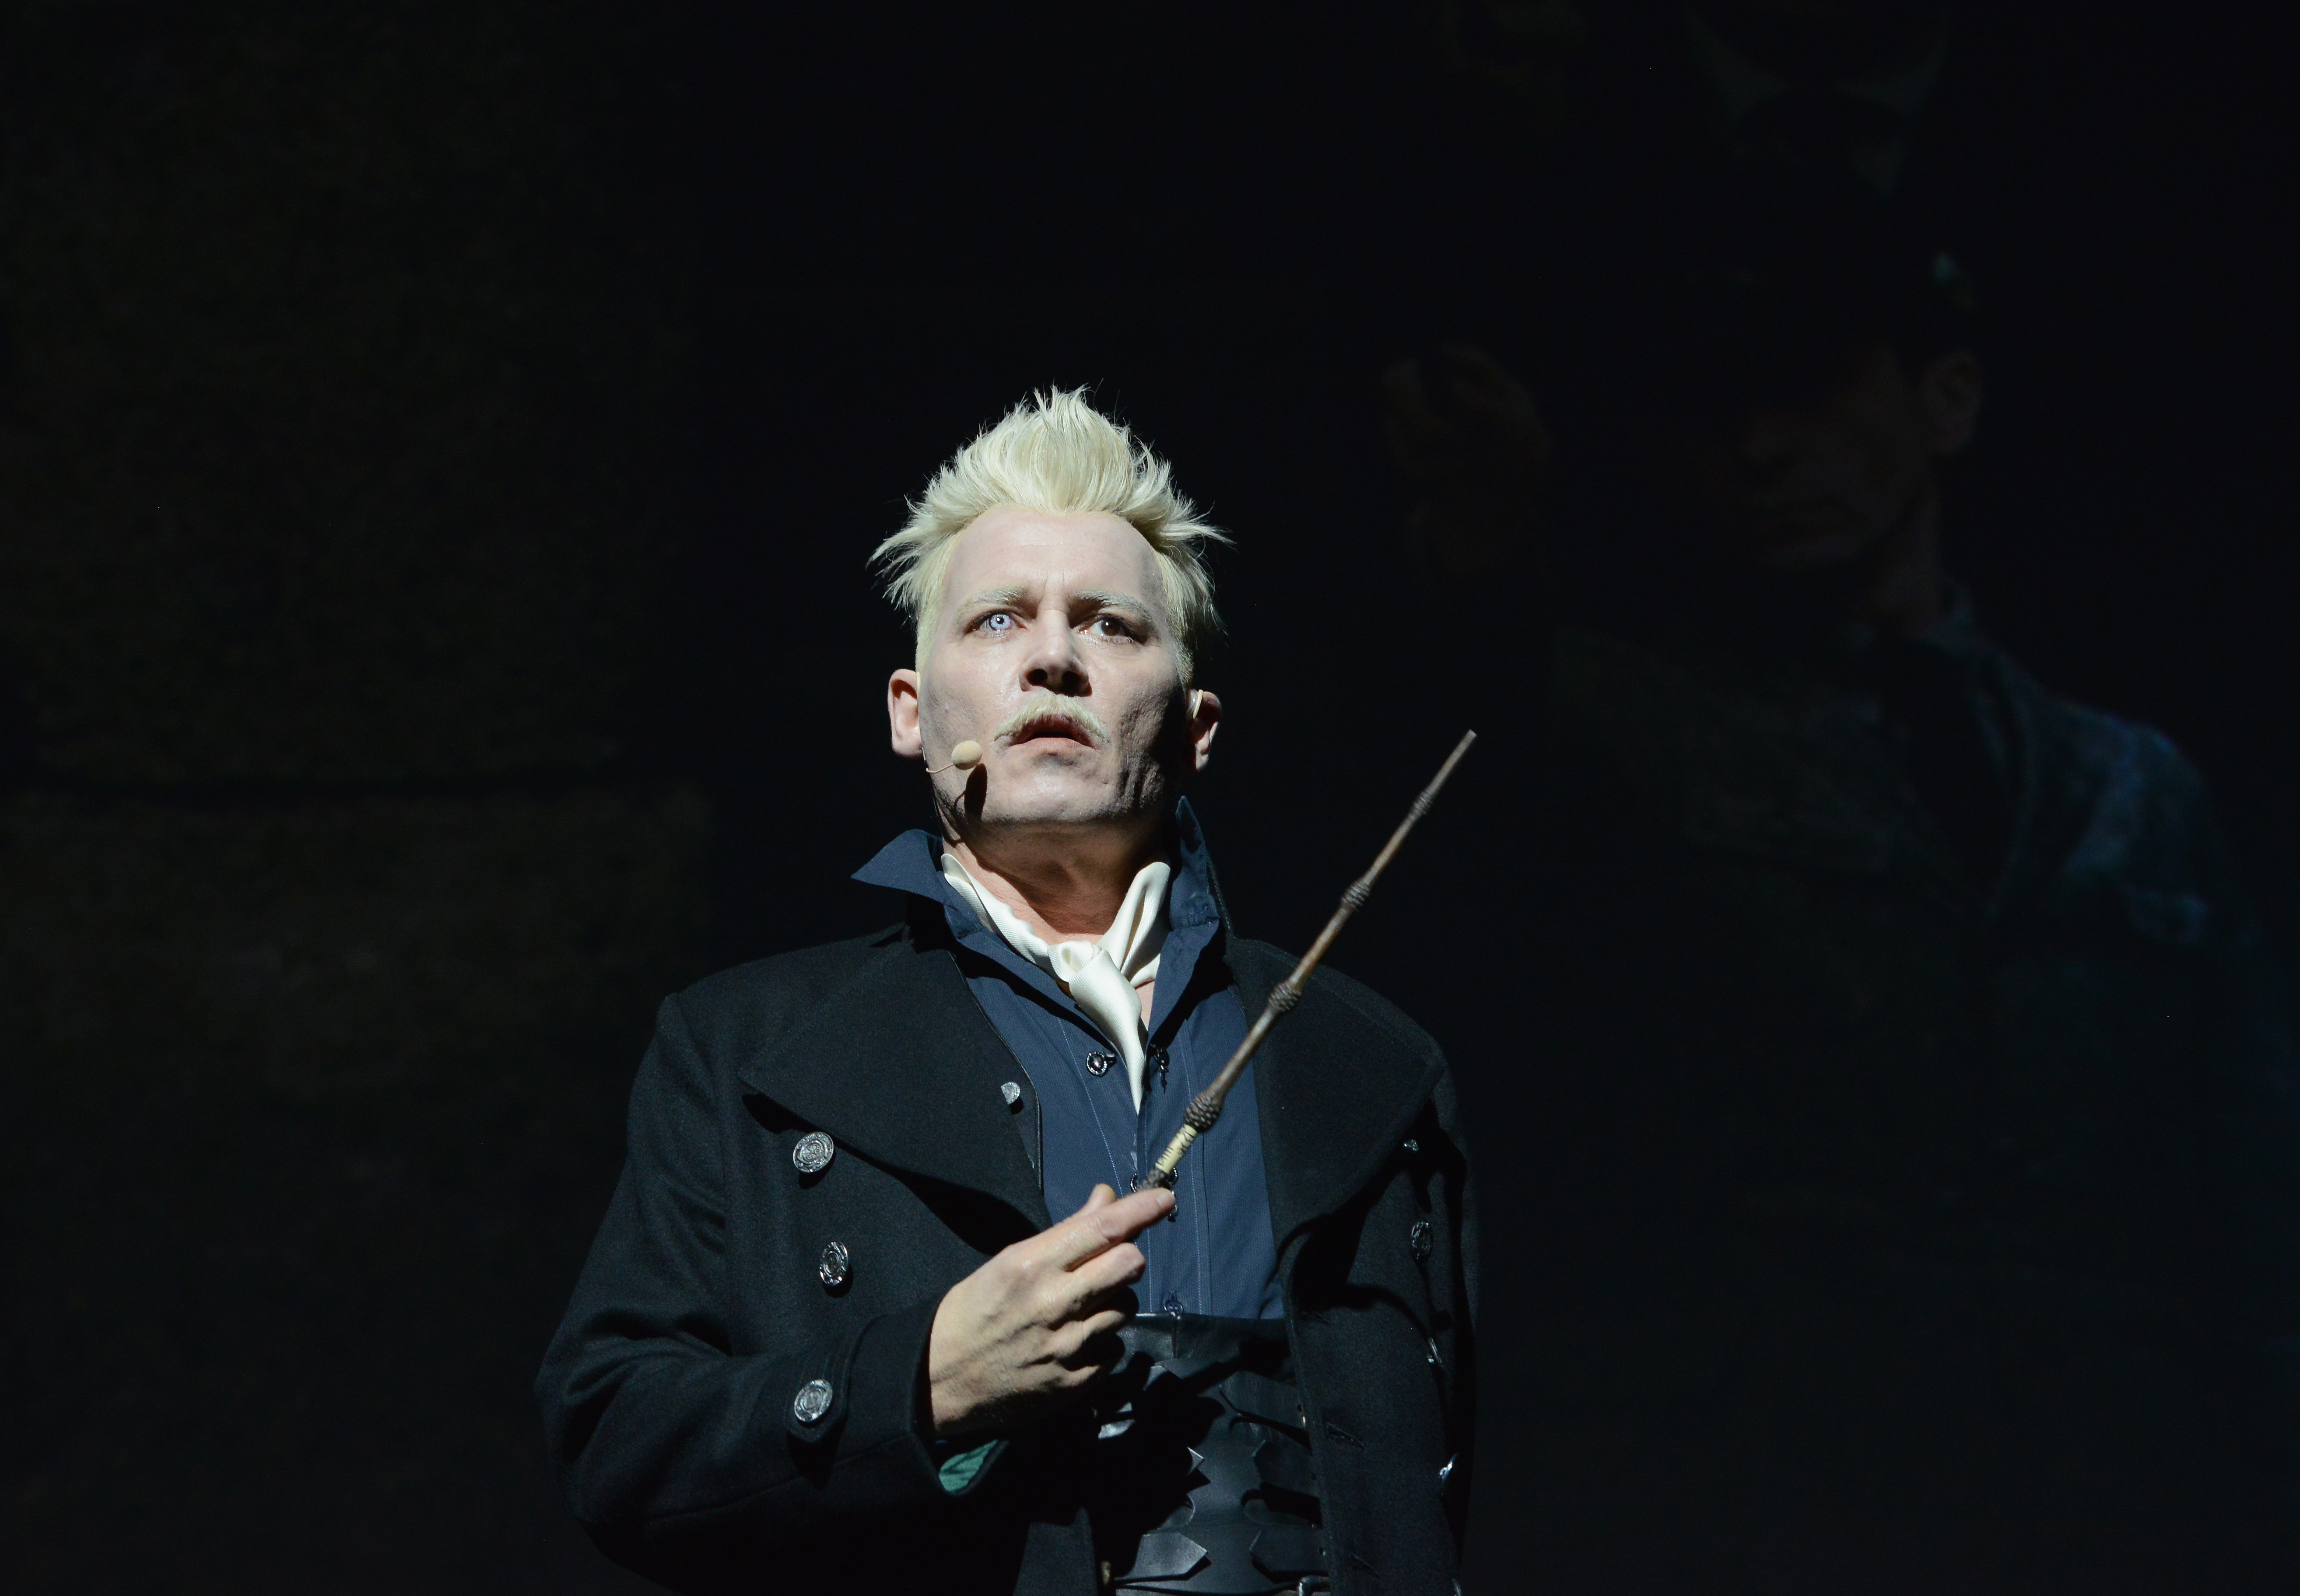 Johnny Depp Surprisingly Appears As Grindelwald At Comic-Con Dividing Fans 